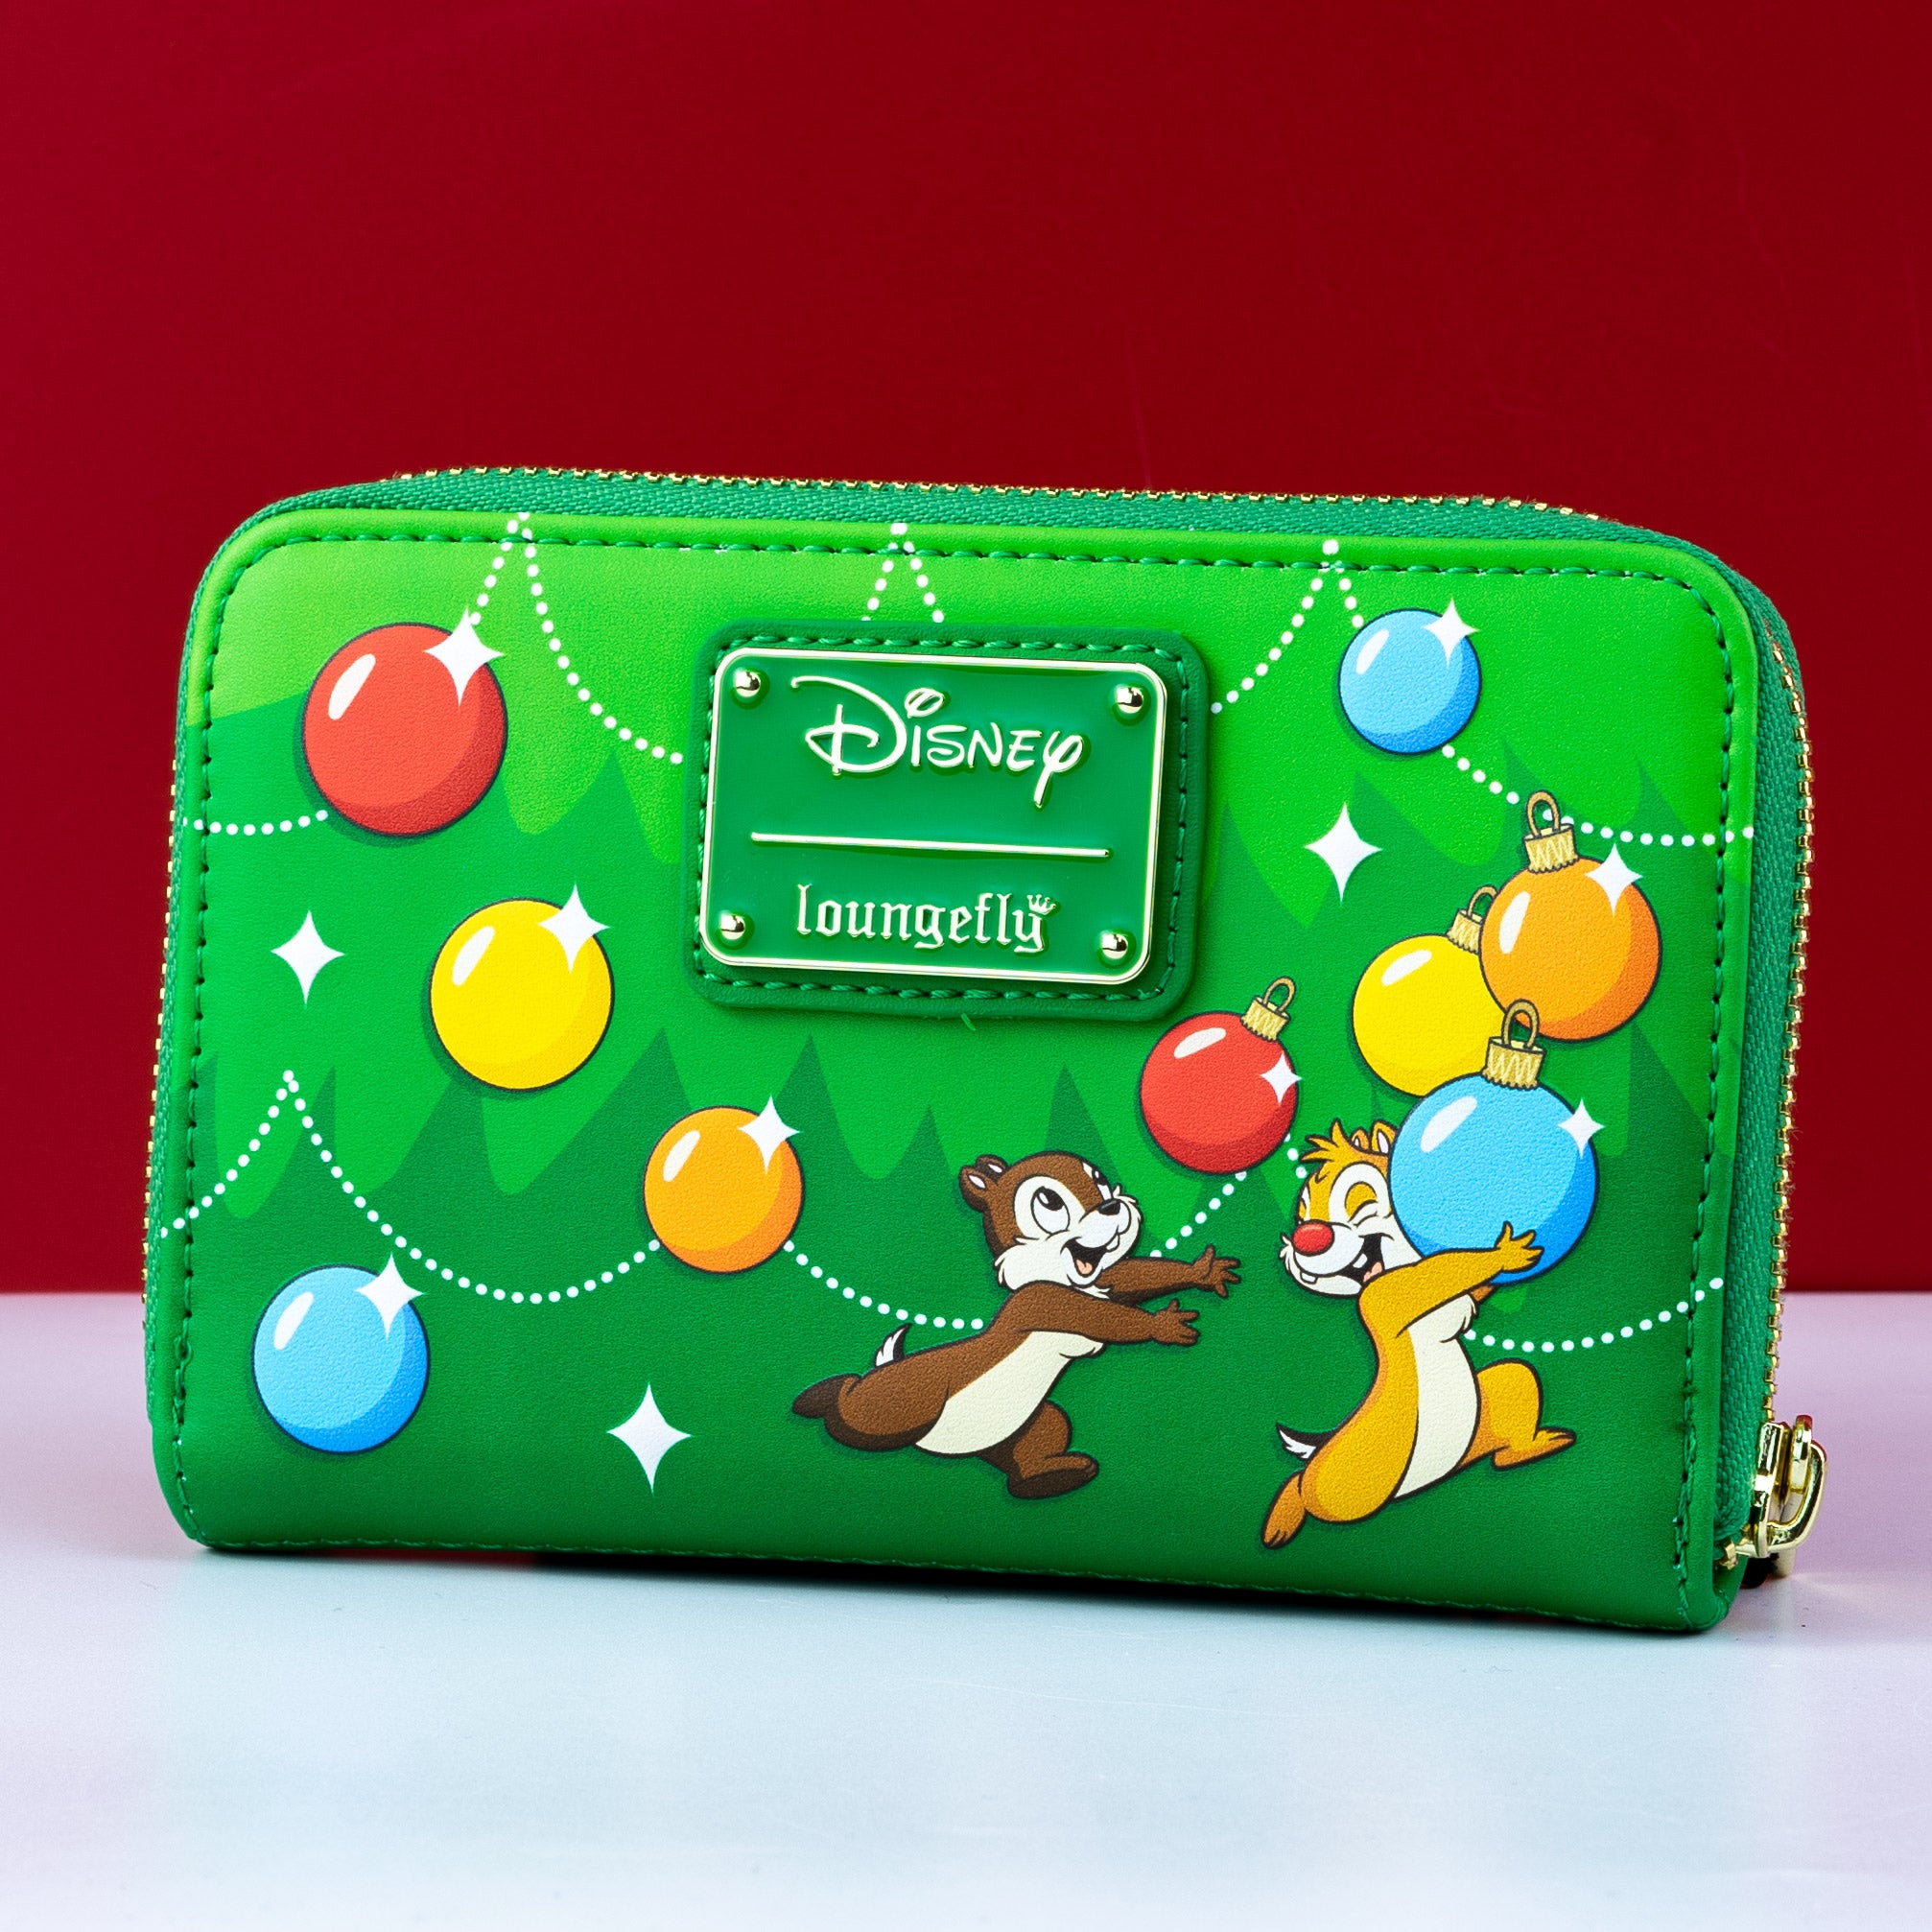 Loungefly x Disney Chip and Dale Christmas Ornament Wallet